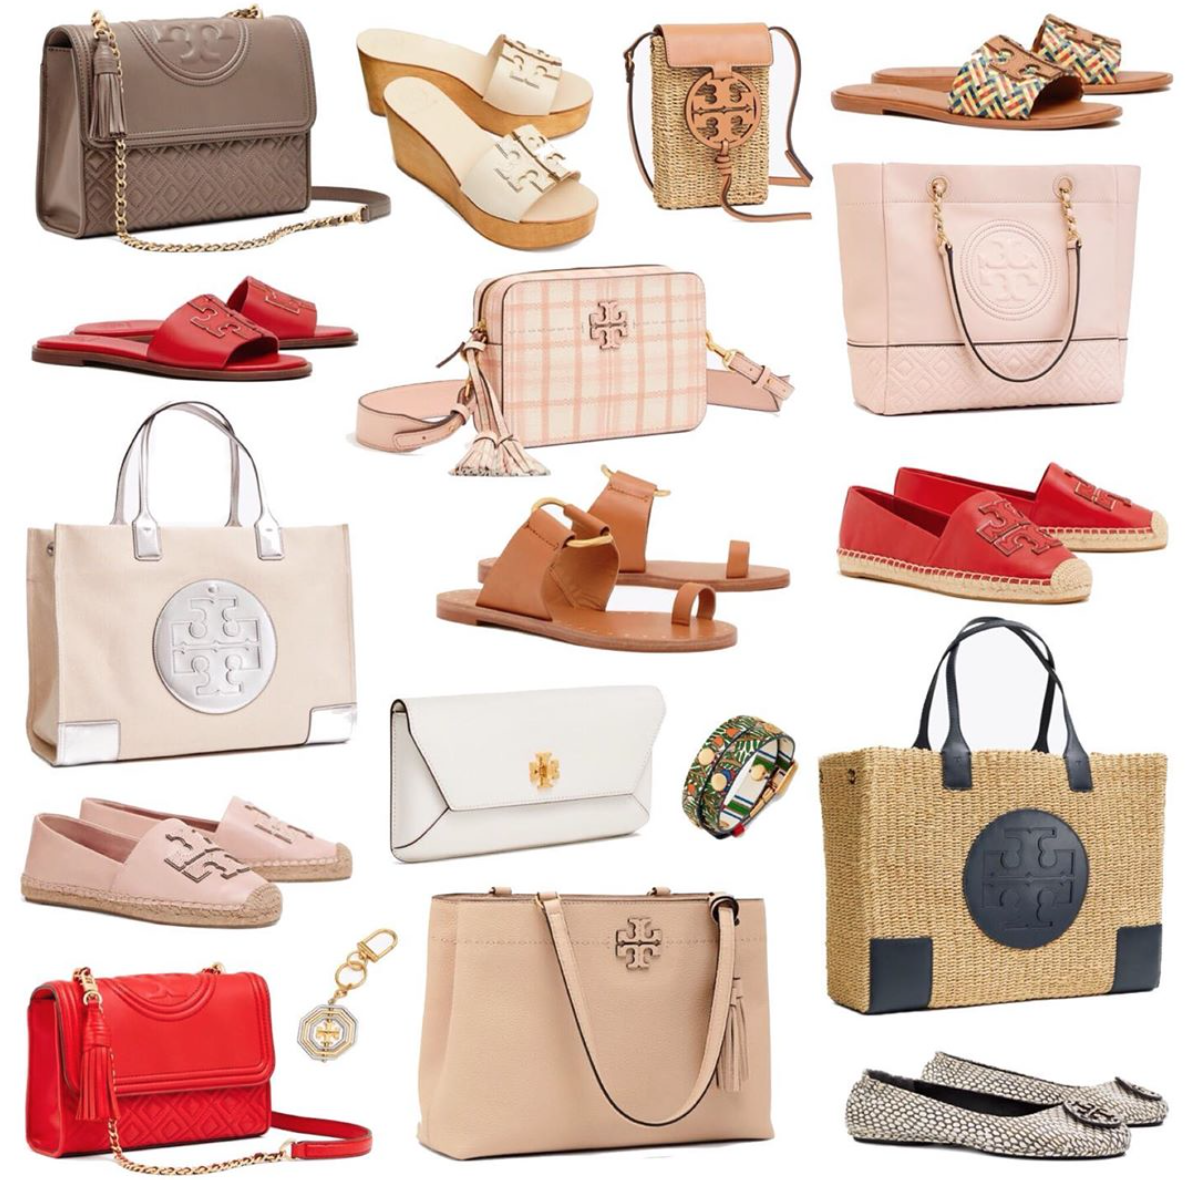 The Tory Burch Semi-Annual Sale Is Up to 60 Percent Off - PureWow